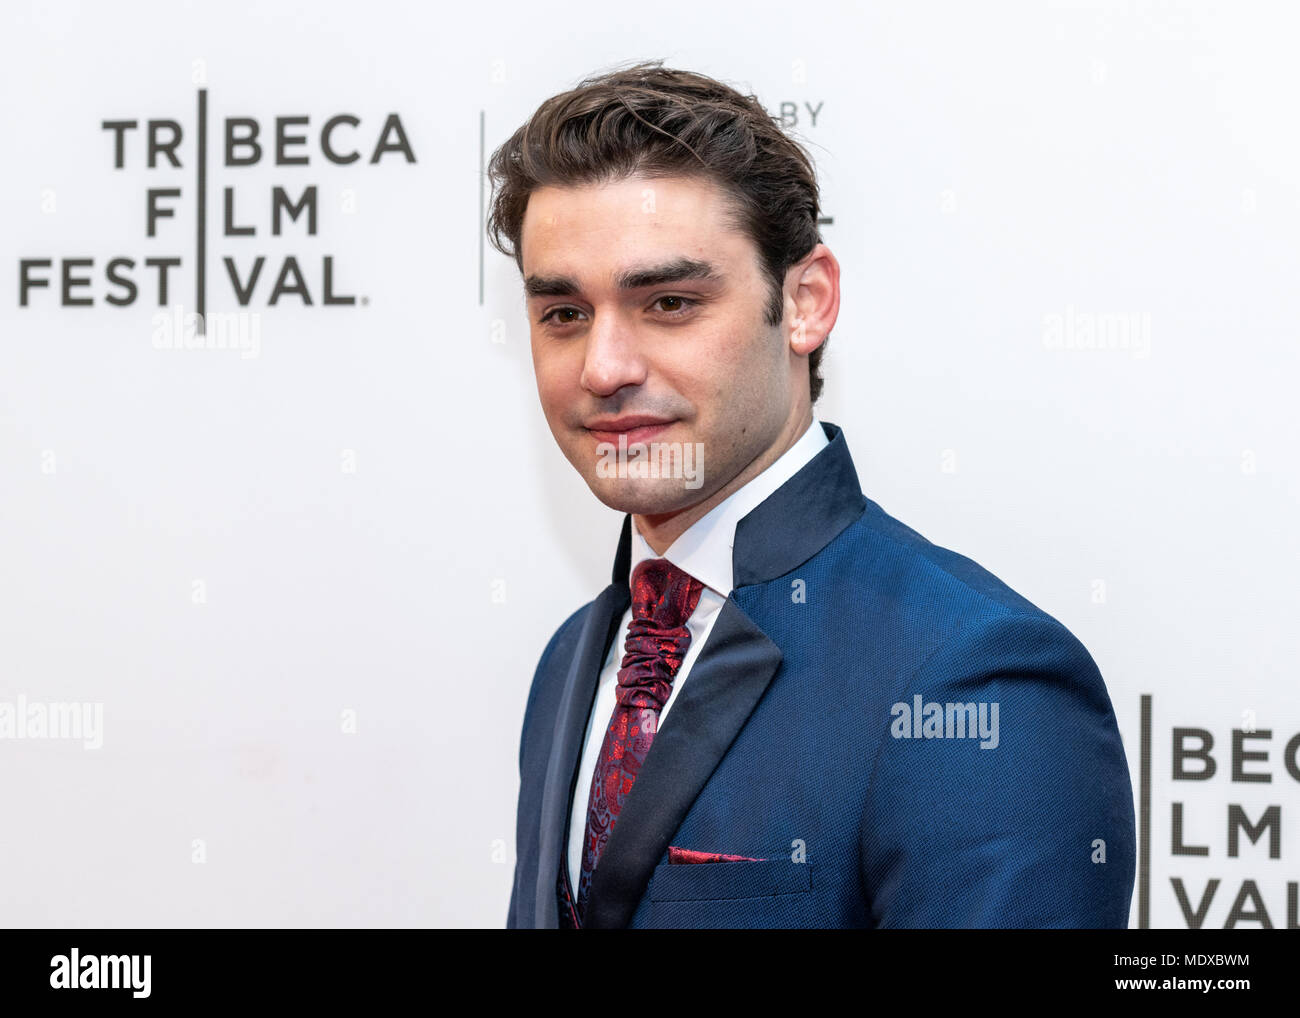 New York, USA, 20 April 2018. Actor Alex Rich  attends the premiere of National Geographic's 'Genius: Picasso' at the Tribeca Film Festival in New York city.  He portrays the young Pablo Picasso in the film. Photo by Enrique Shore/ Alamy Live News Credit: Enrique Shore/Alamy Live News Stock Photo